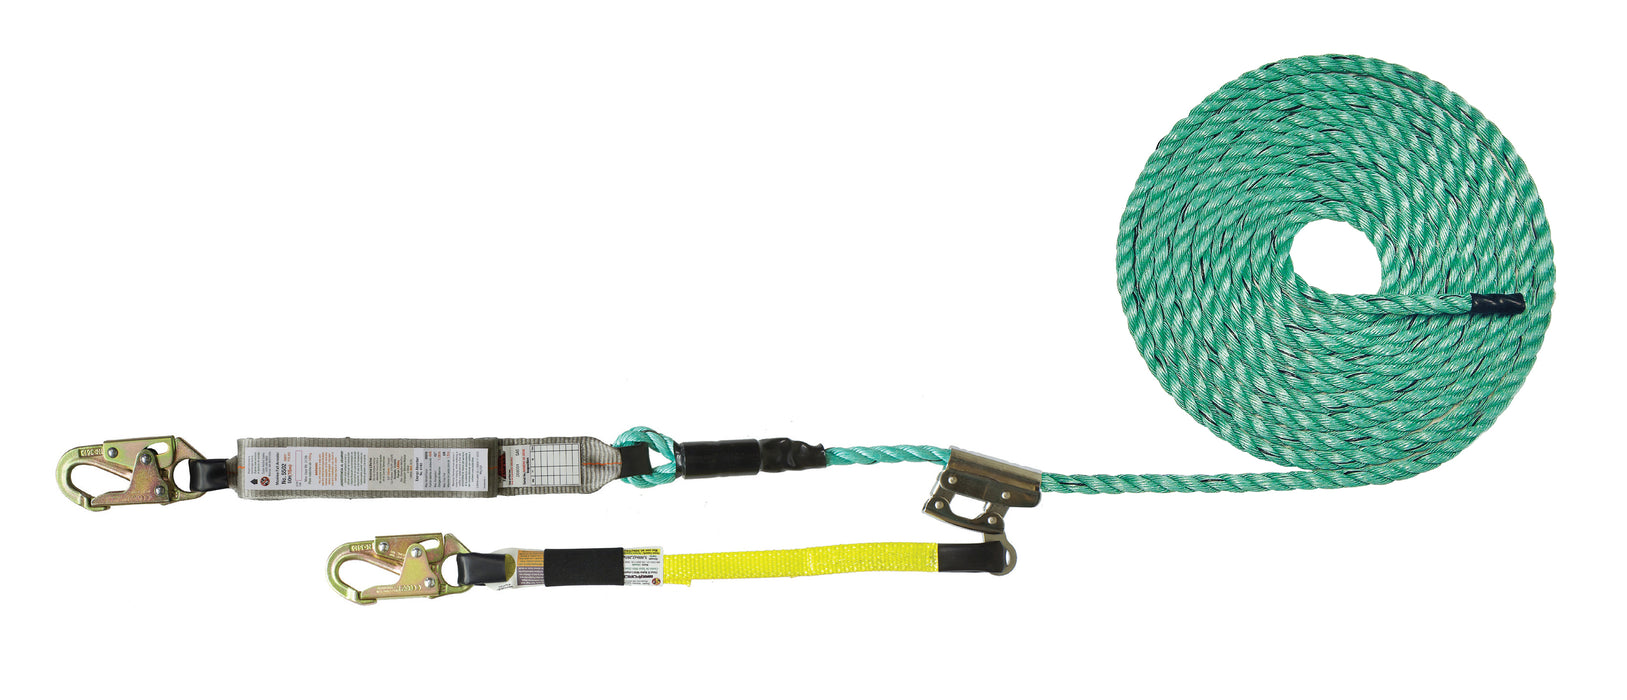 Super Anchor 30' Maxima Lifeline with Integral Energy Absorber, Mechanical Grab, Lanyard and Snaphook 5501-30